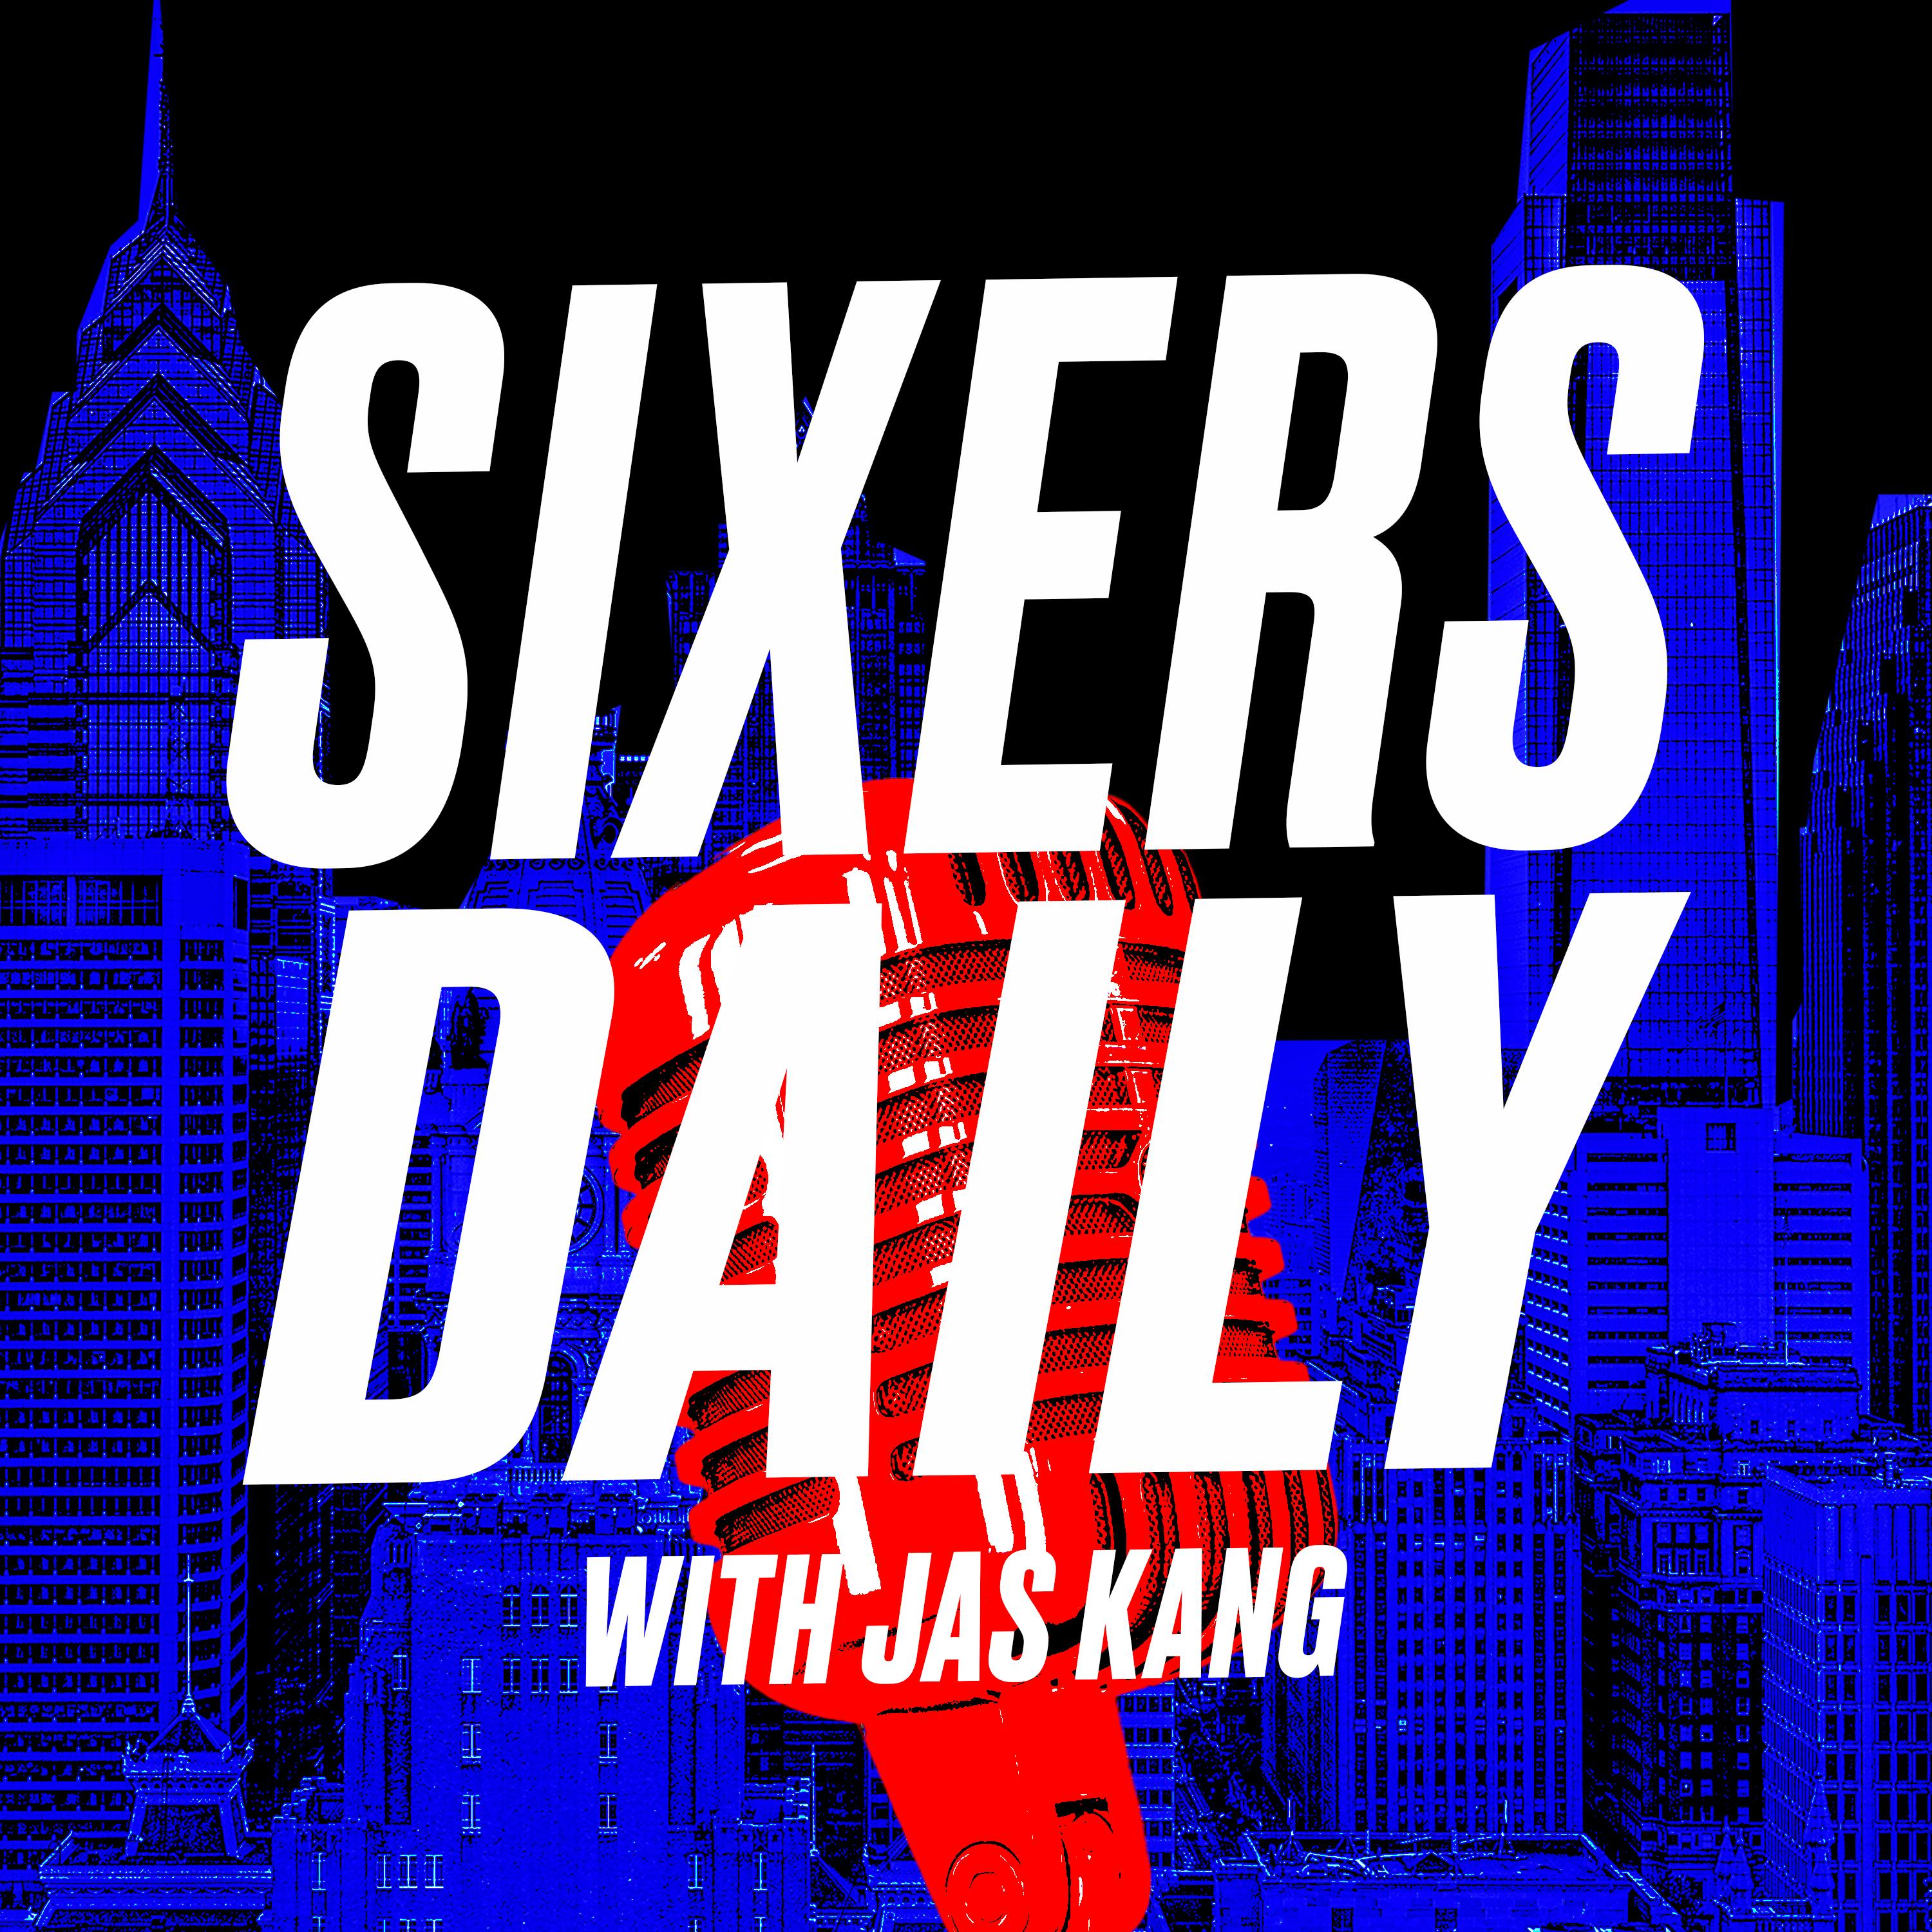 Sixers Daily with Jas Kang - Will the Sixers bring back Danny Green & Shake Milton? Plus, some Quin Snyder/Doc Rivers talk, Donovan Mitchell and Game 3 of the NBA Finals. With Jackson Frank